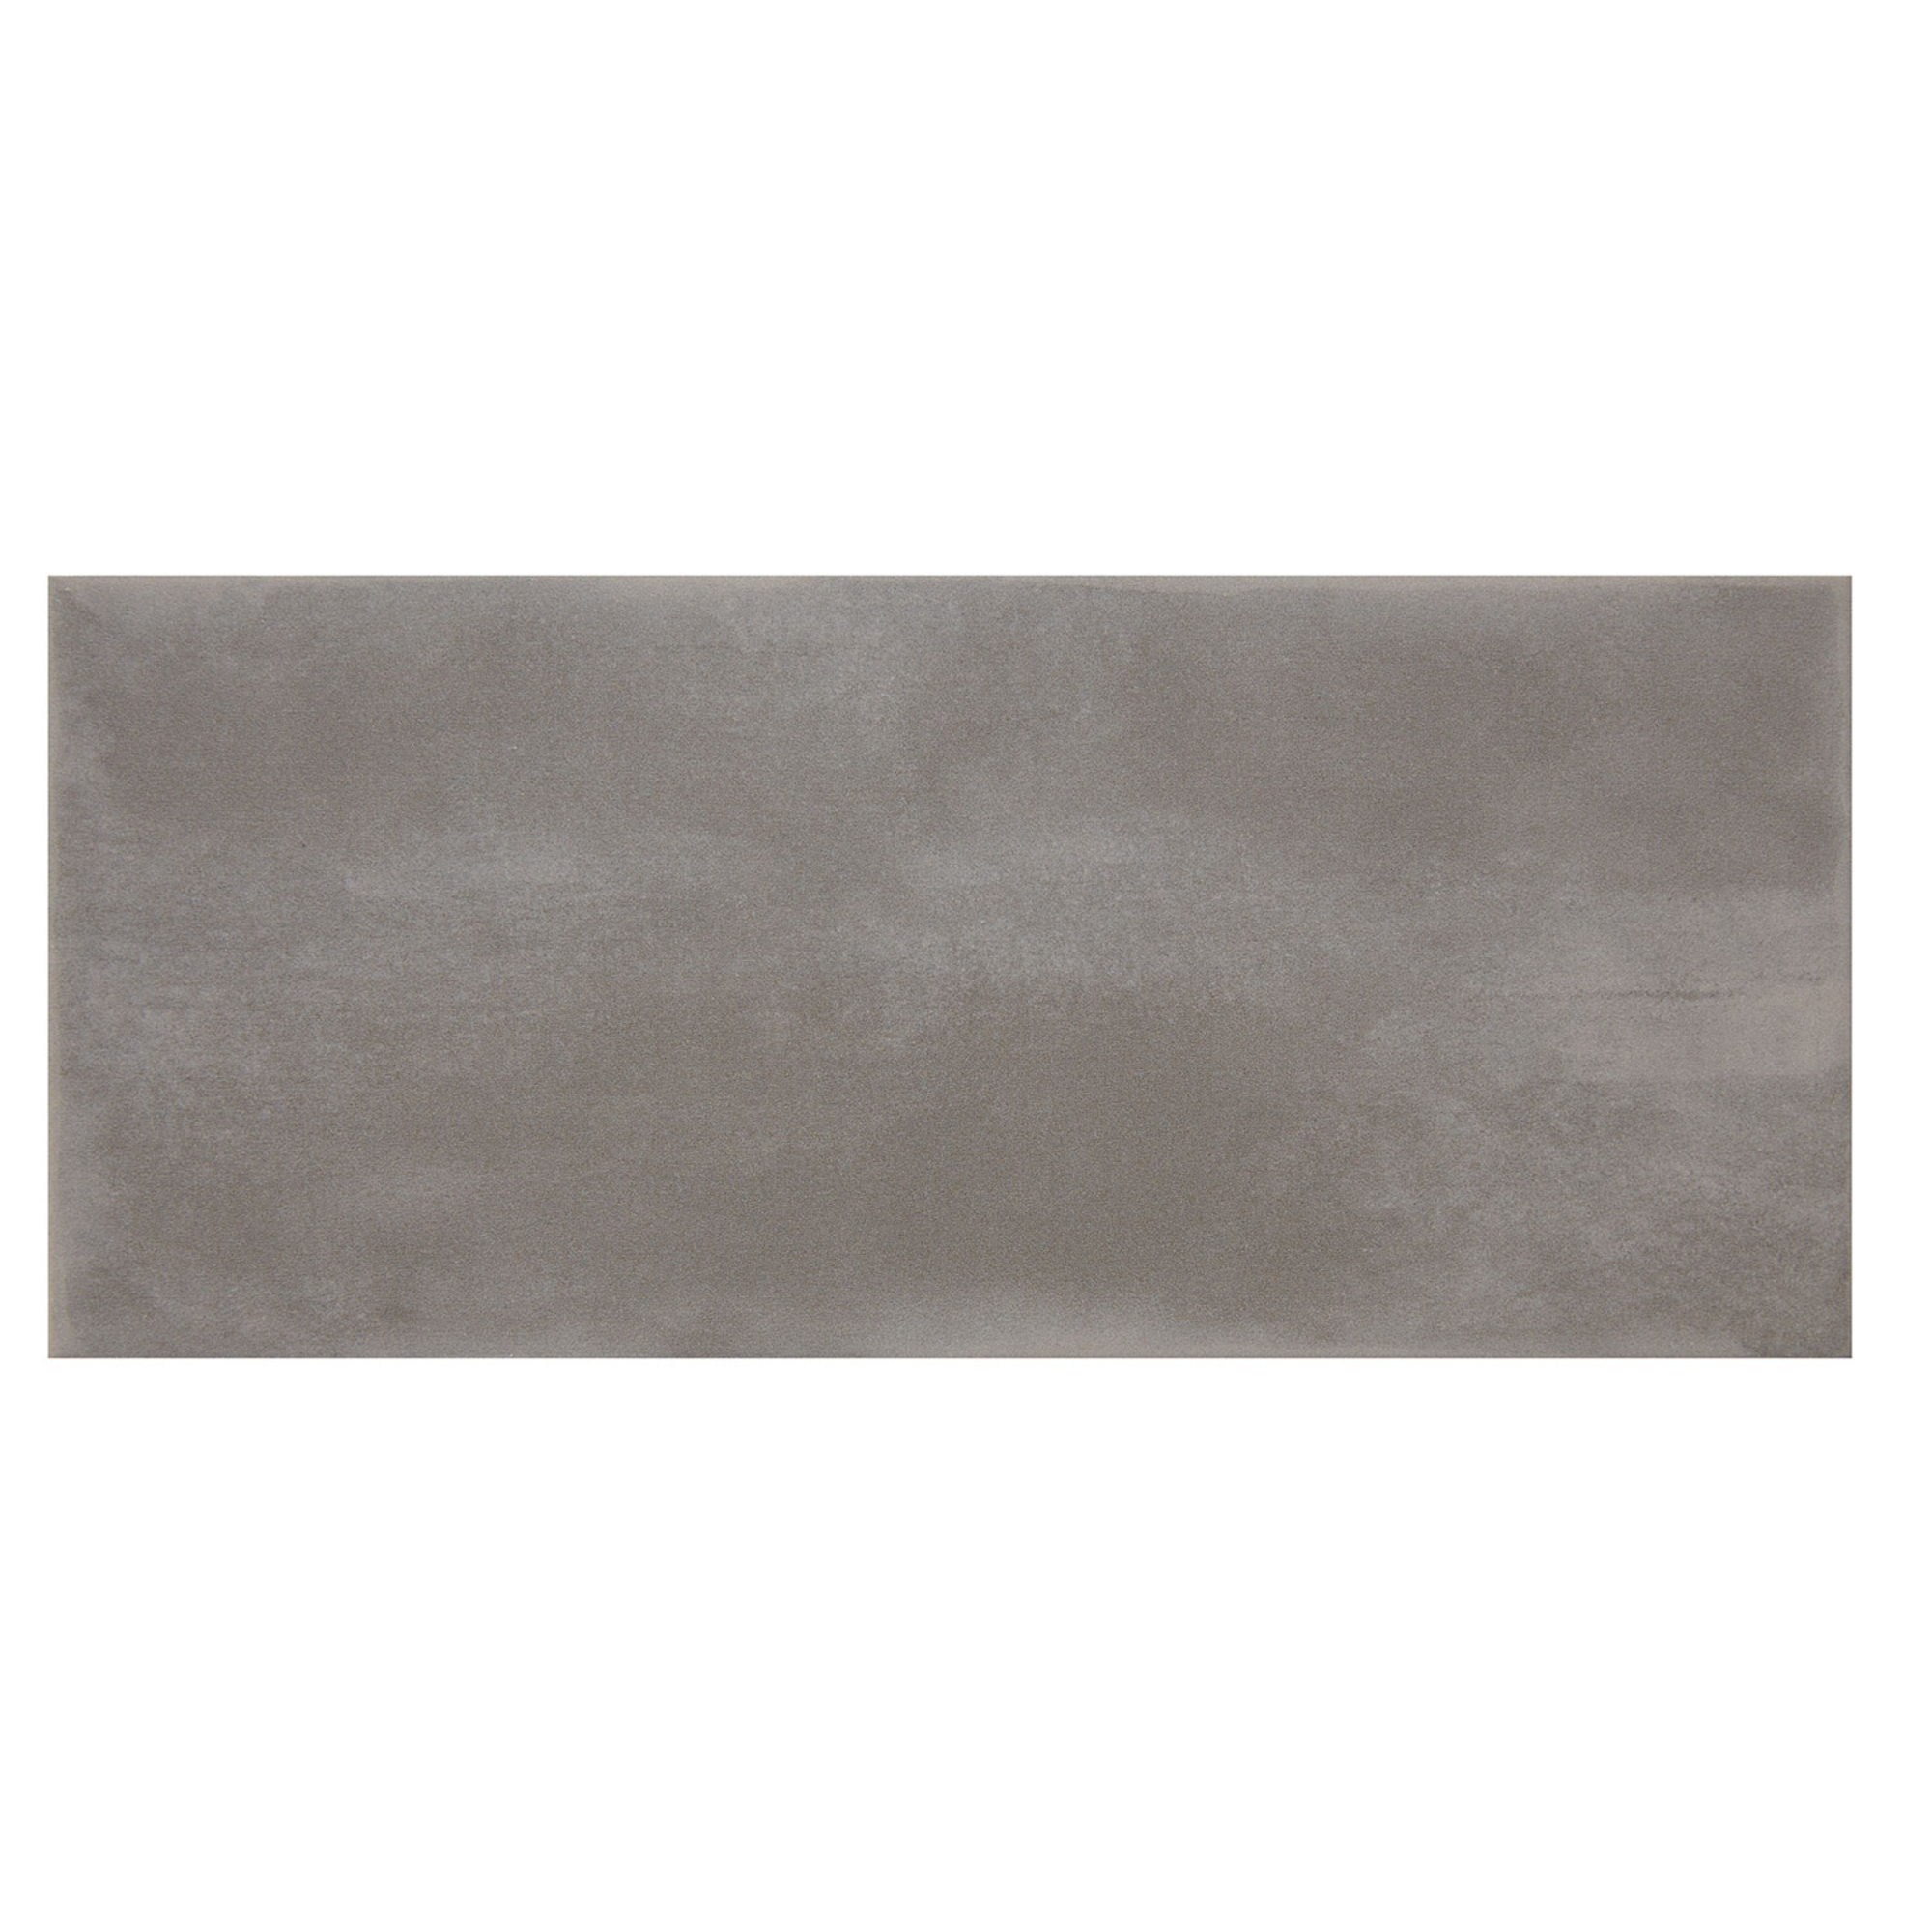 Chantilly Taupe 11x25cm (CHAW789-410)